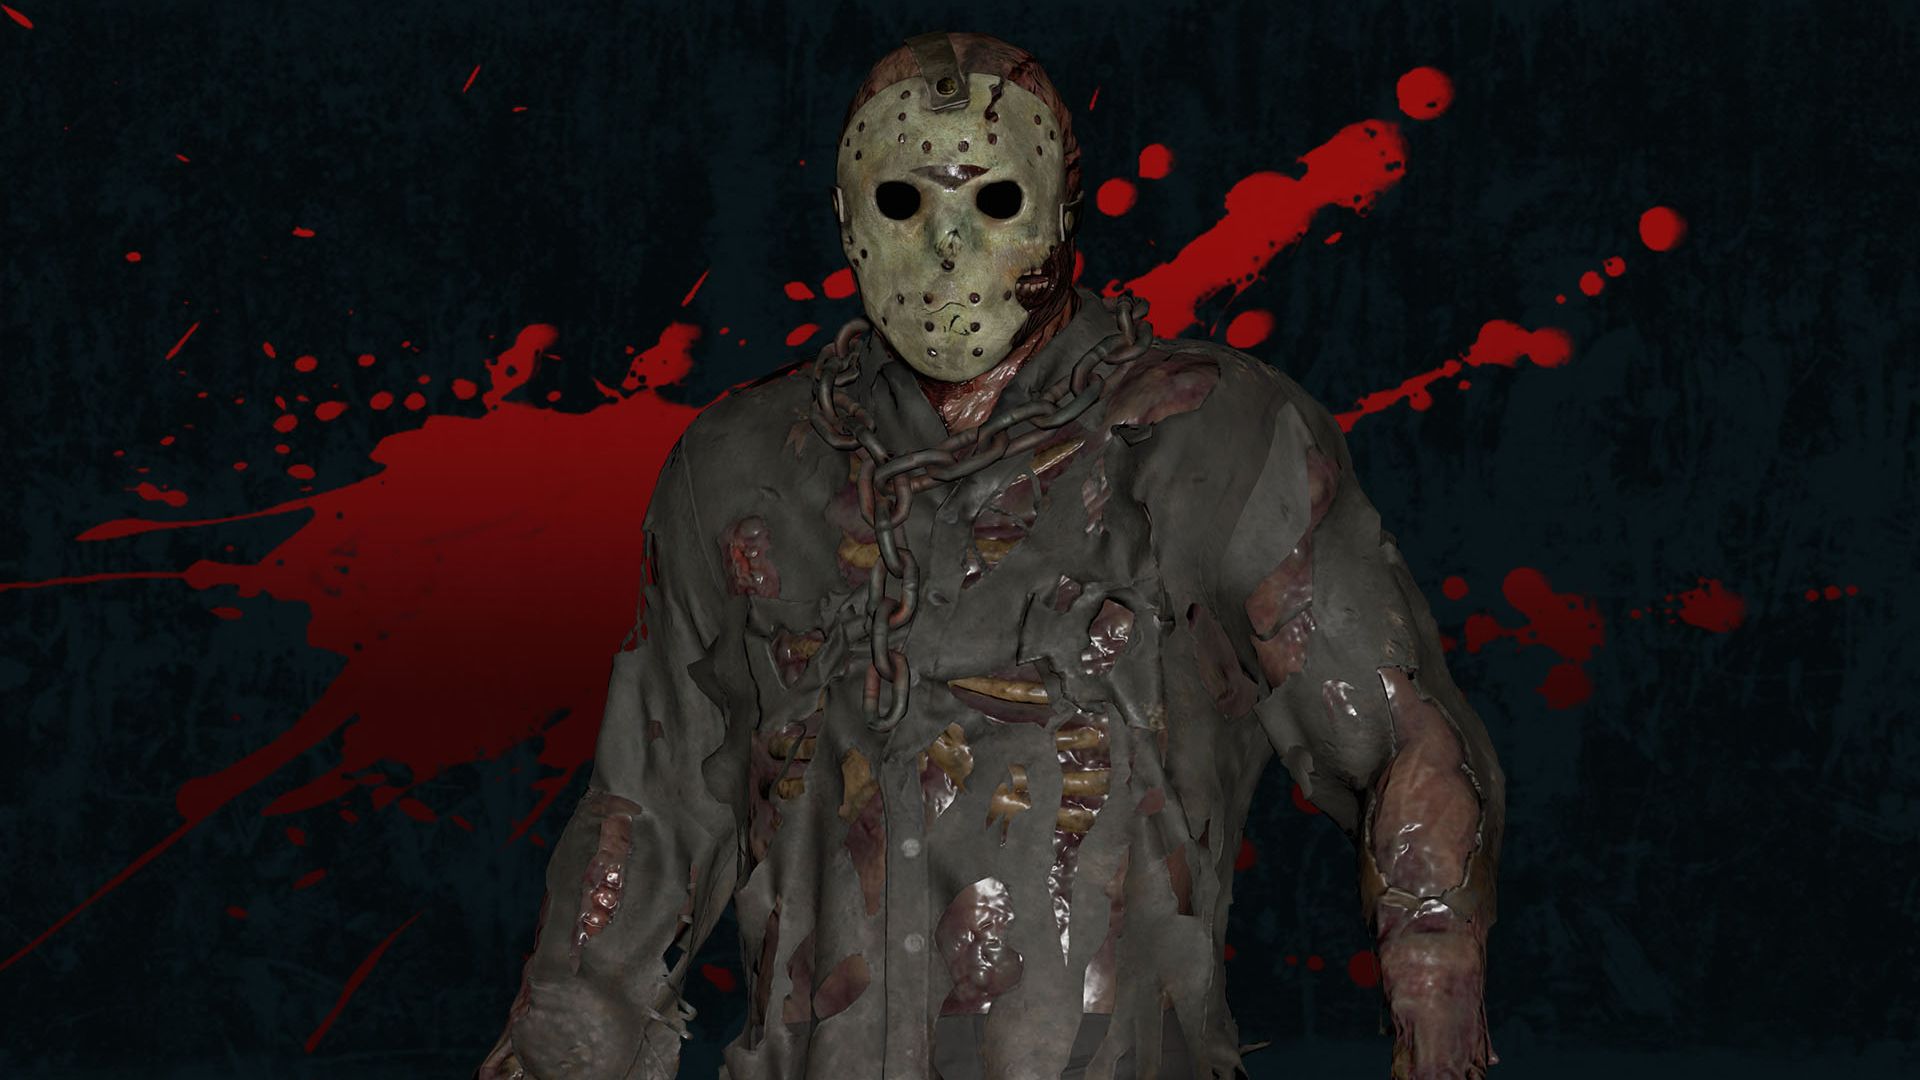 video game, friday the 13th: the game